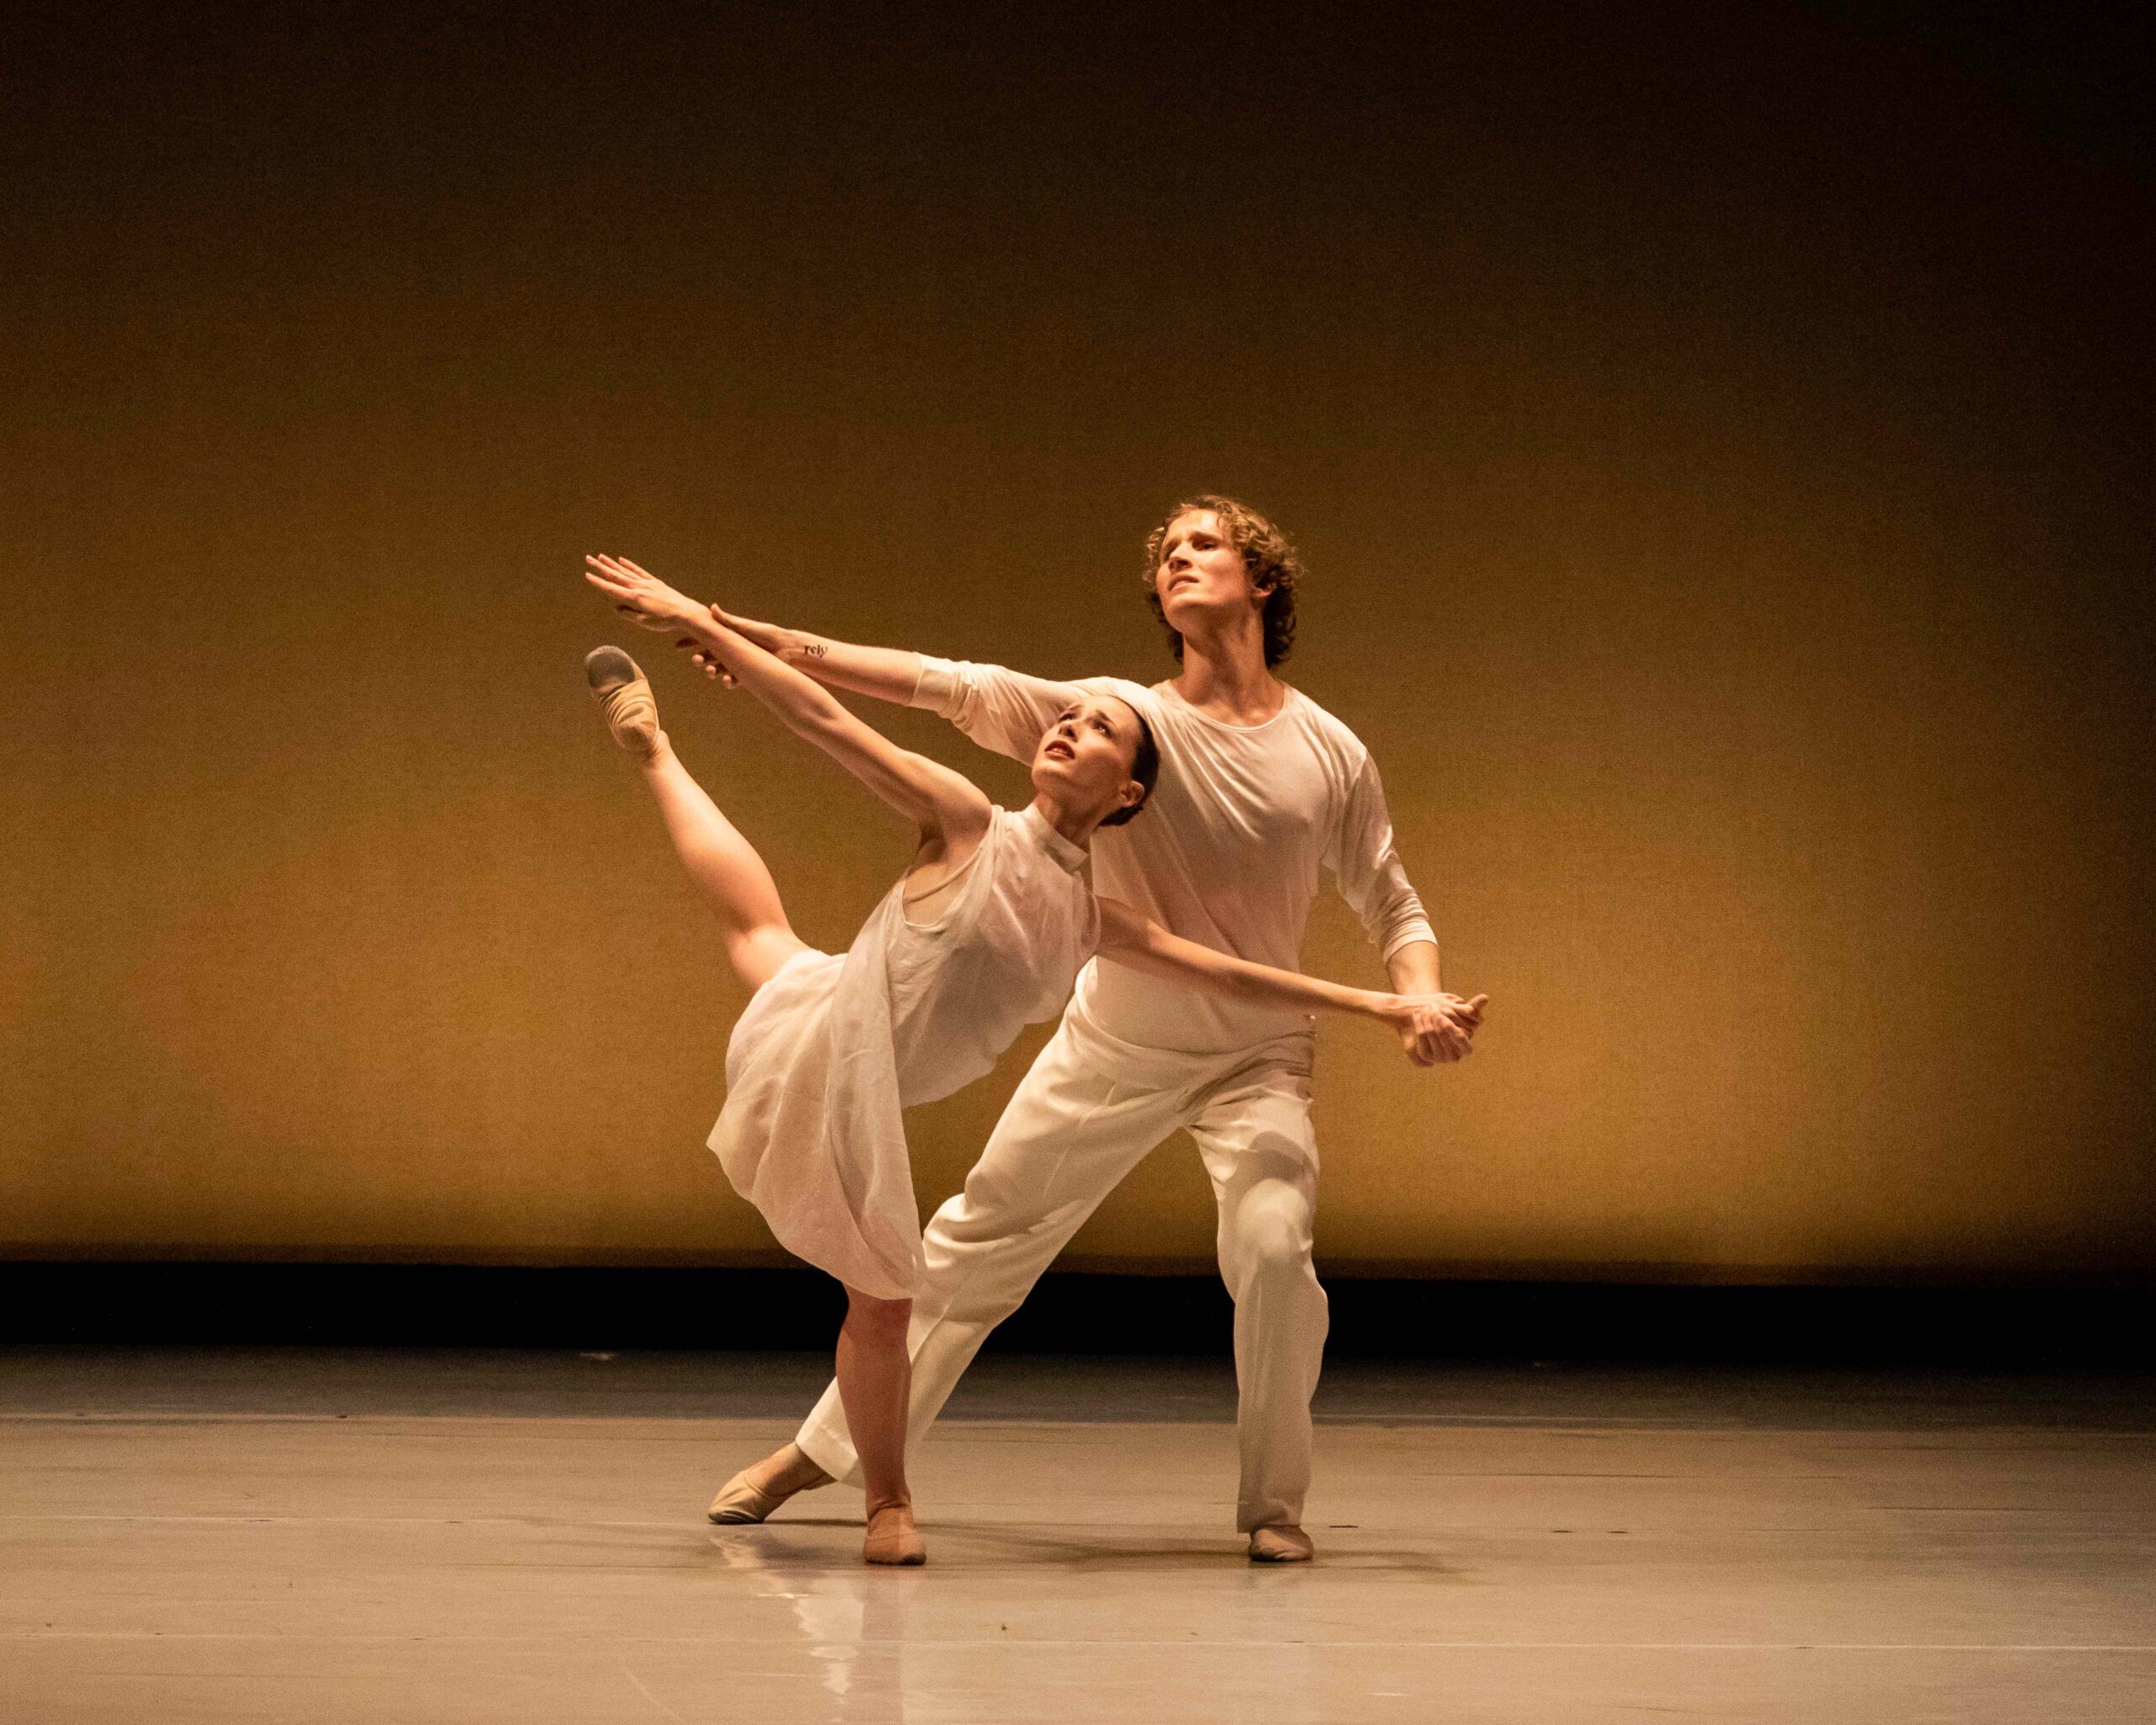 A female dancer moves through a back attitude in parallel, upper body twisting toward her working leg. Her outstretched arms are held by a partner who lunges beside and behind her, gazing in the same upward direction as her.